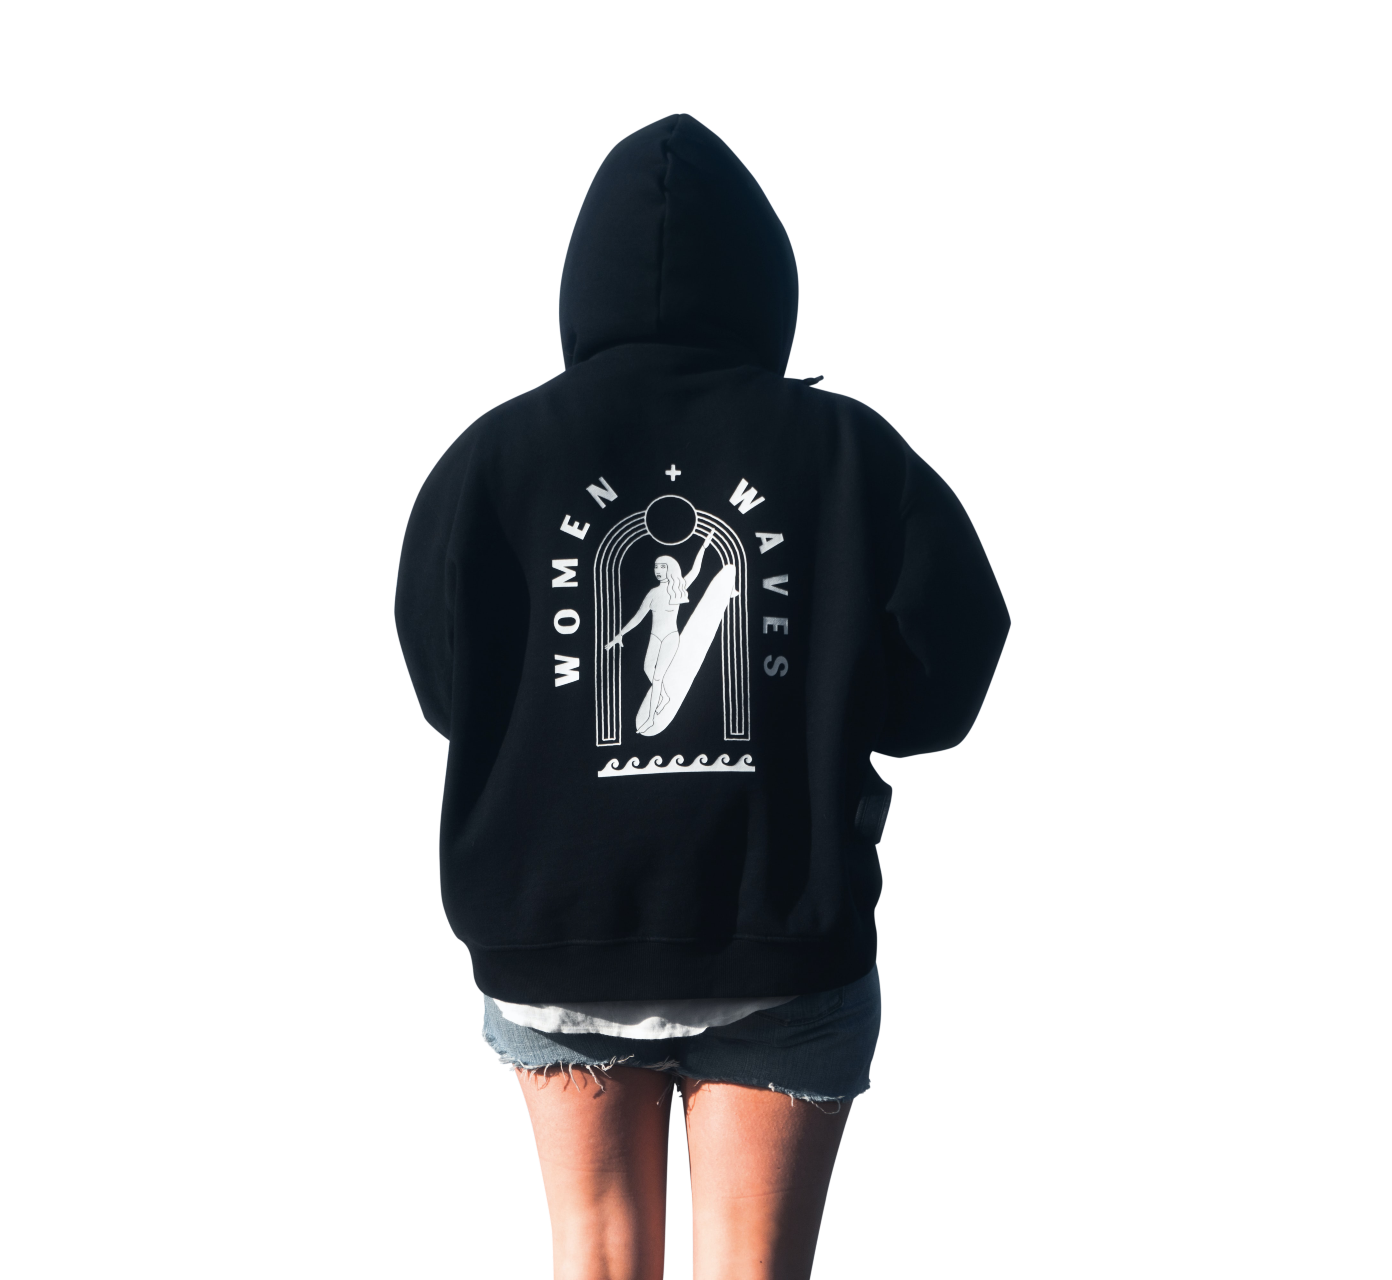 Top view of a Premium pullover hoodies